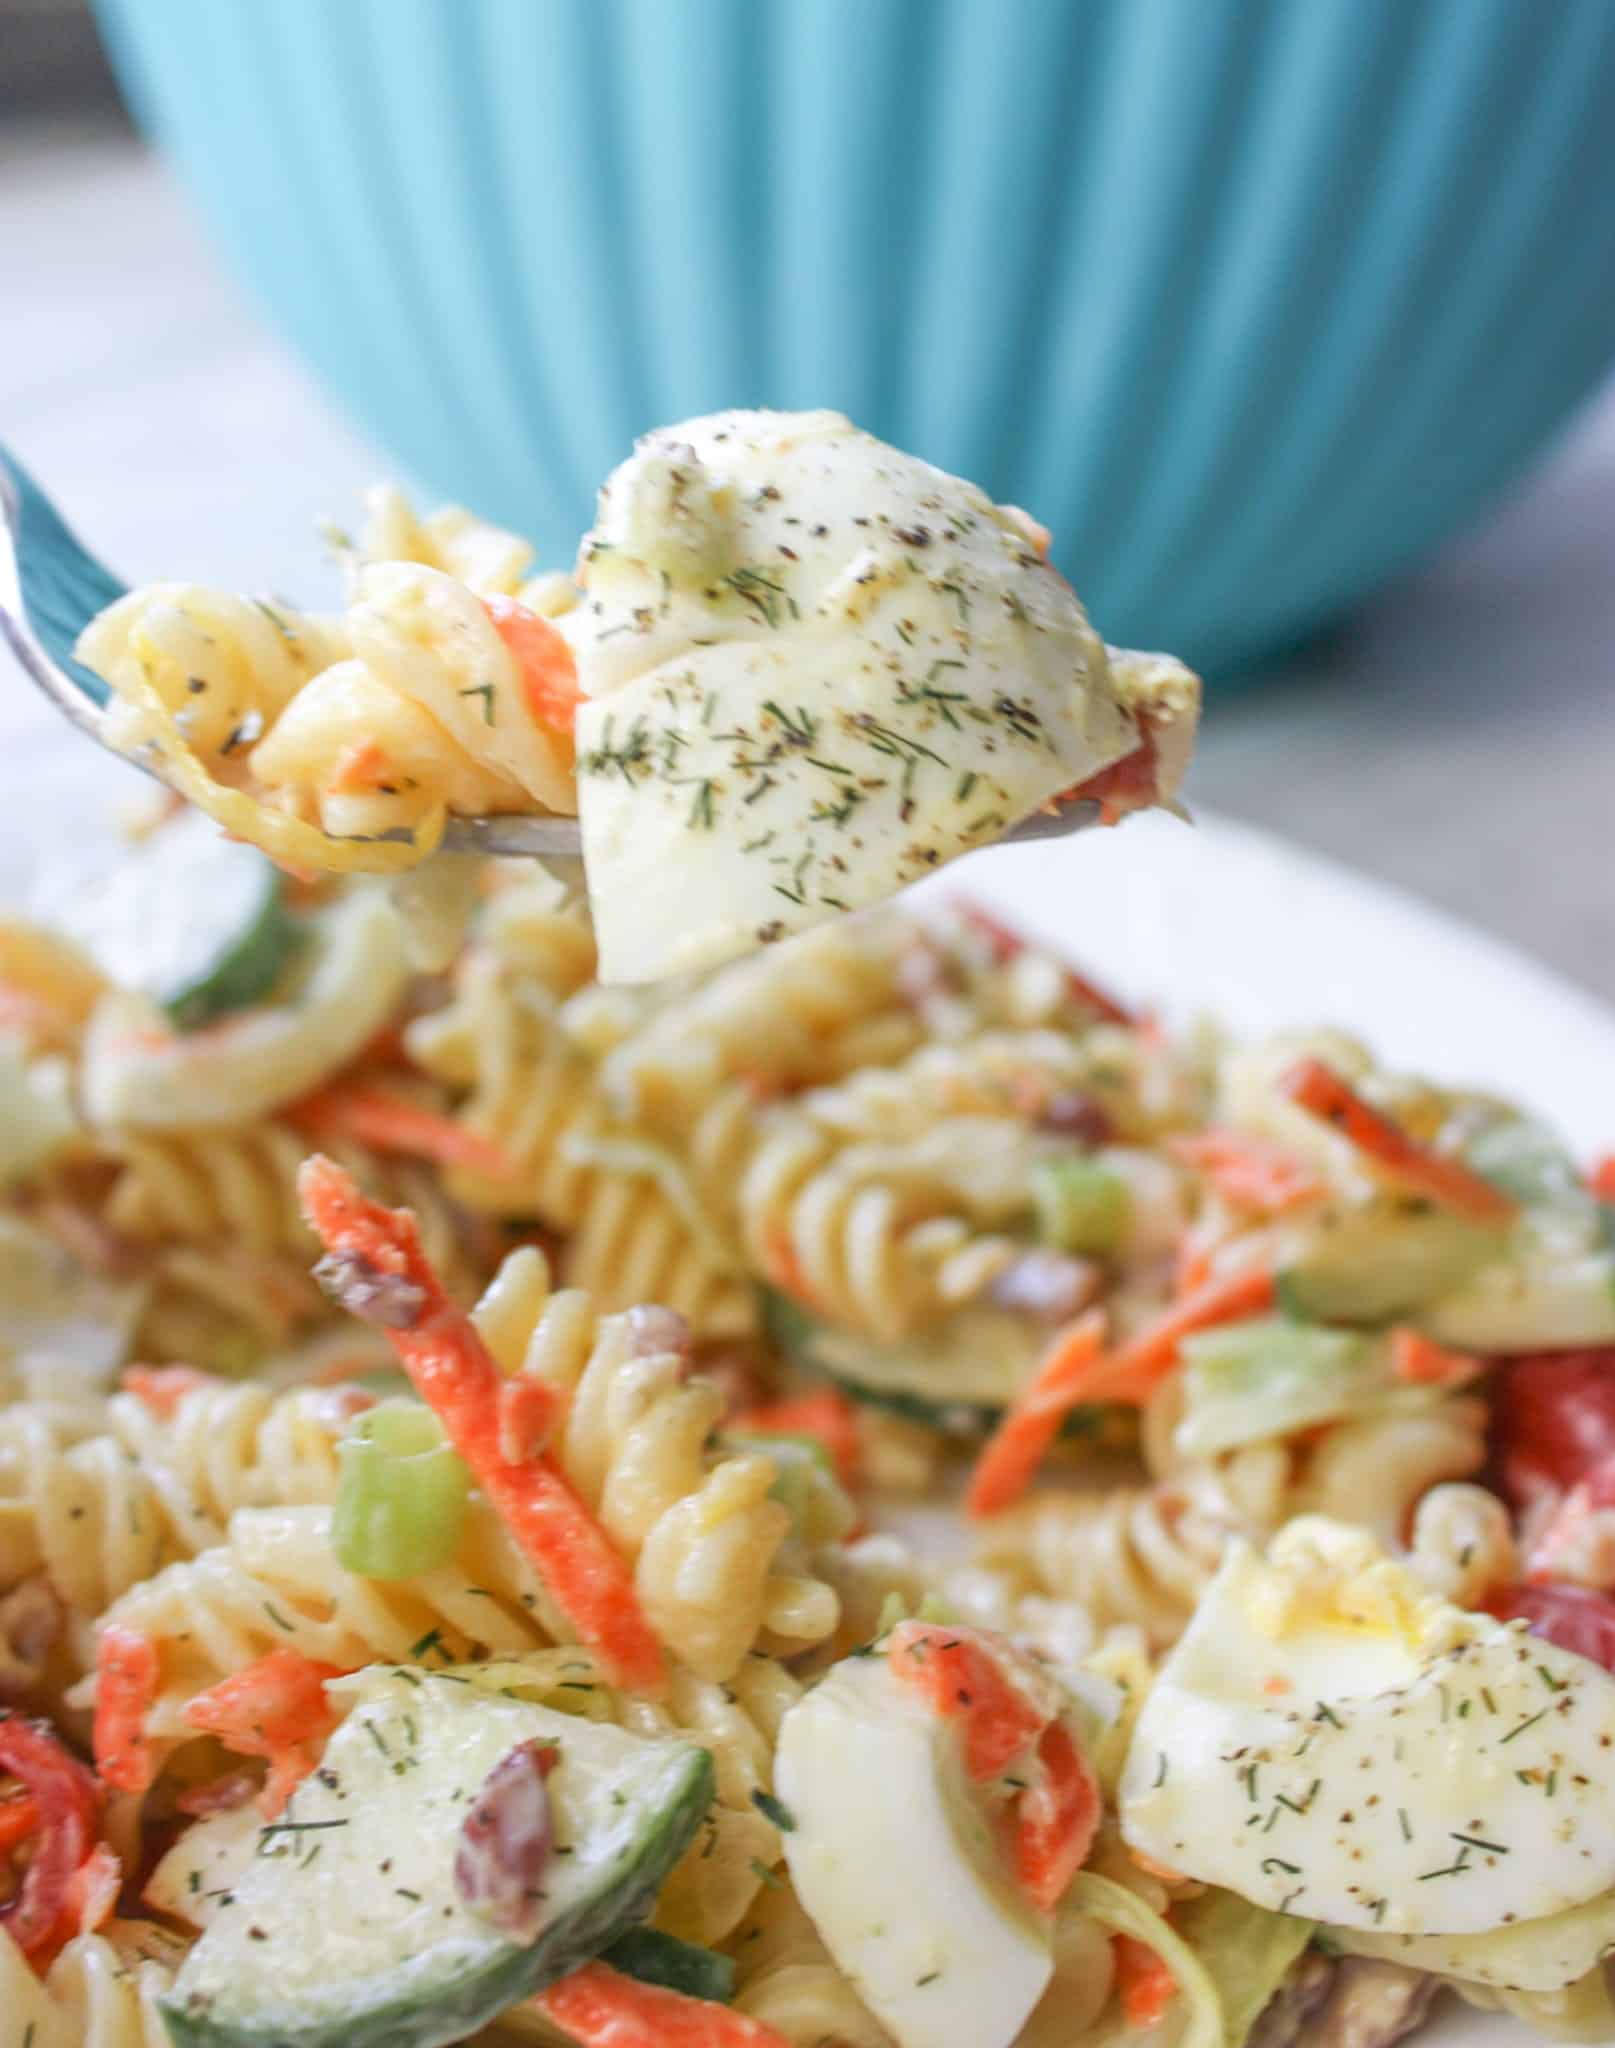 Creamy Dill Pasta Salad is a flavourful side dish for any occasion.  Loaded with gluten free pasta, vegetables, bacon and dried dill it is a tasty,colourful addition to any meal.